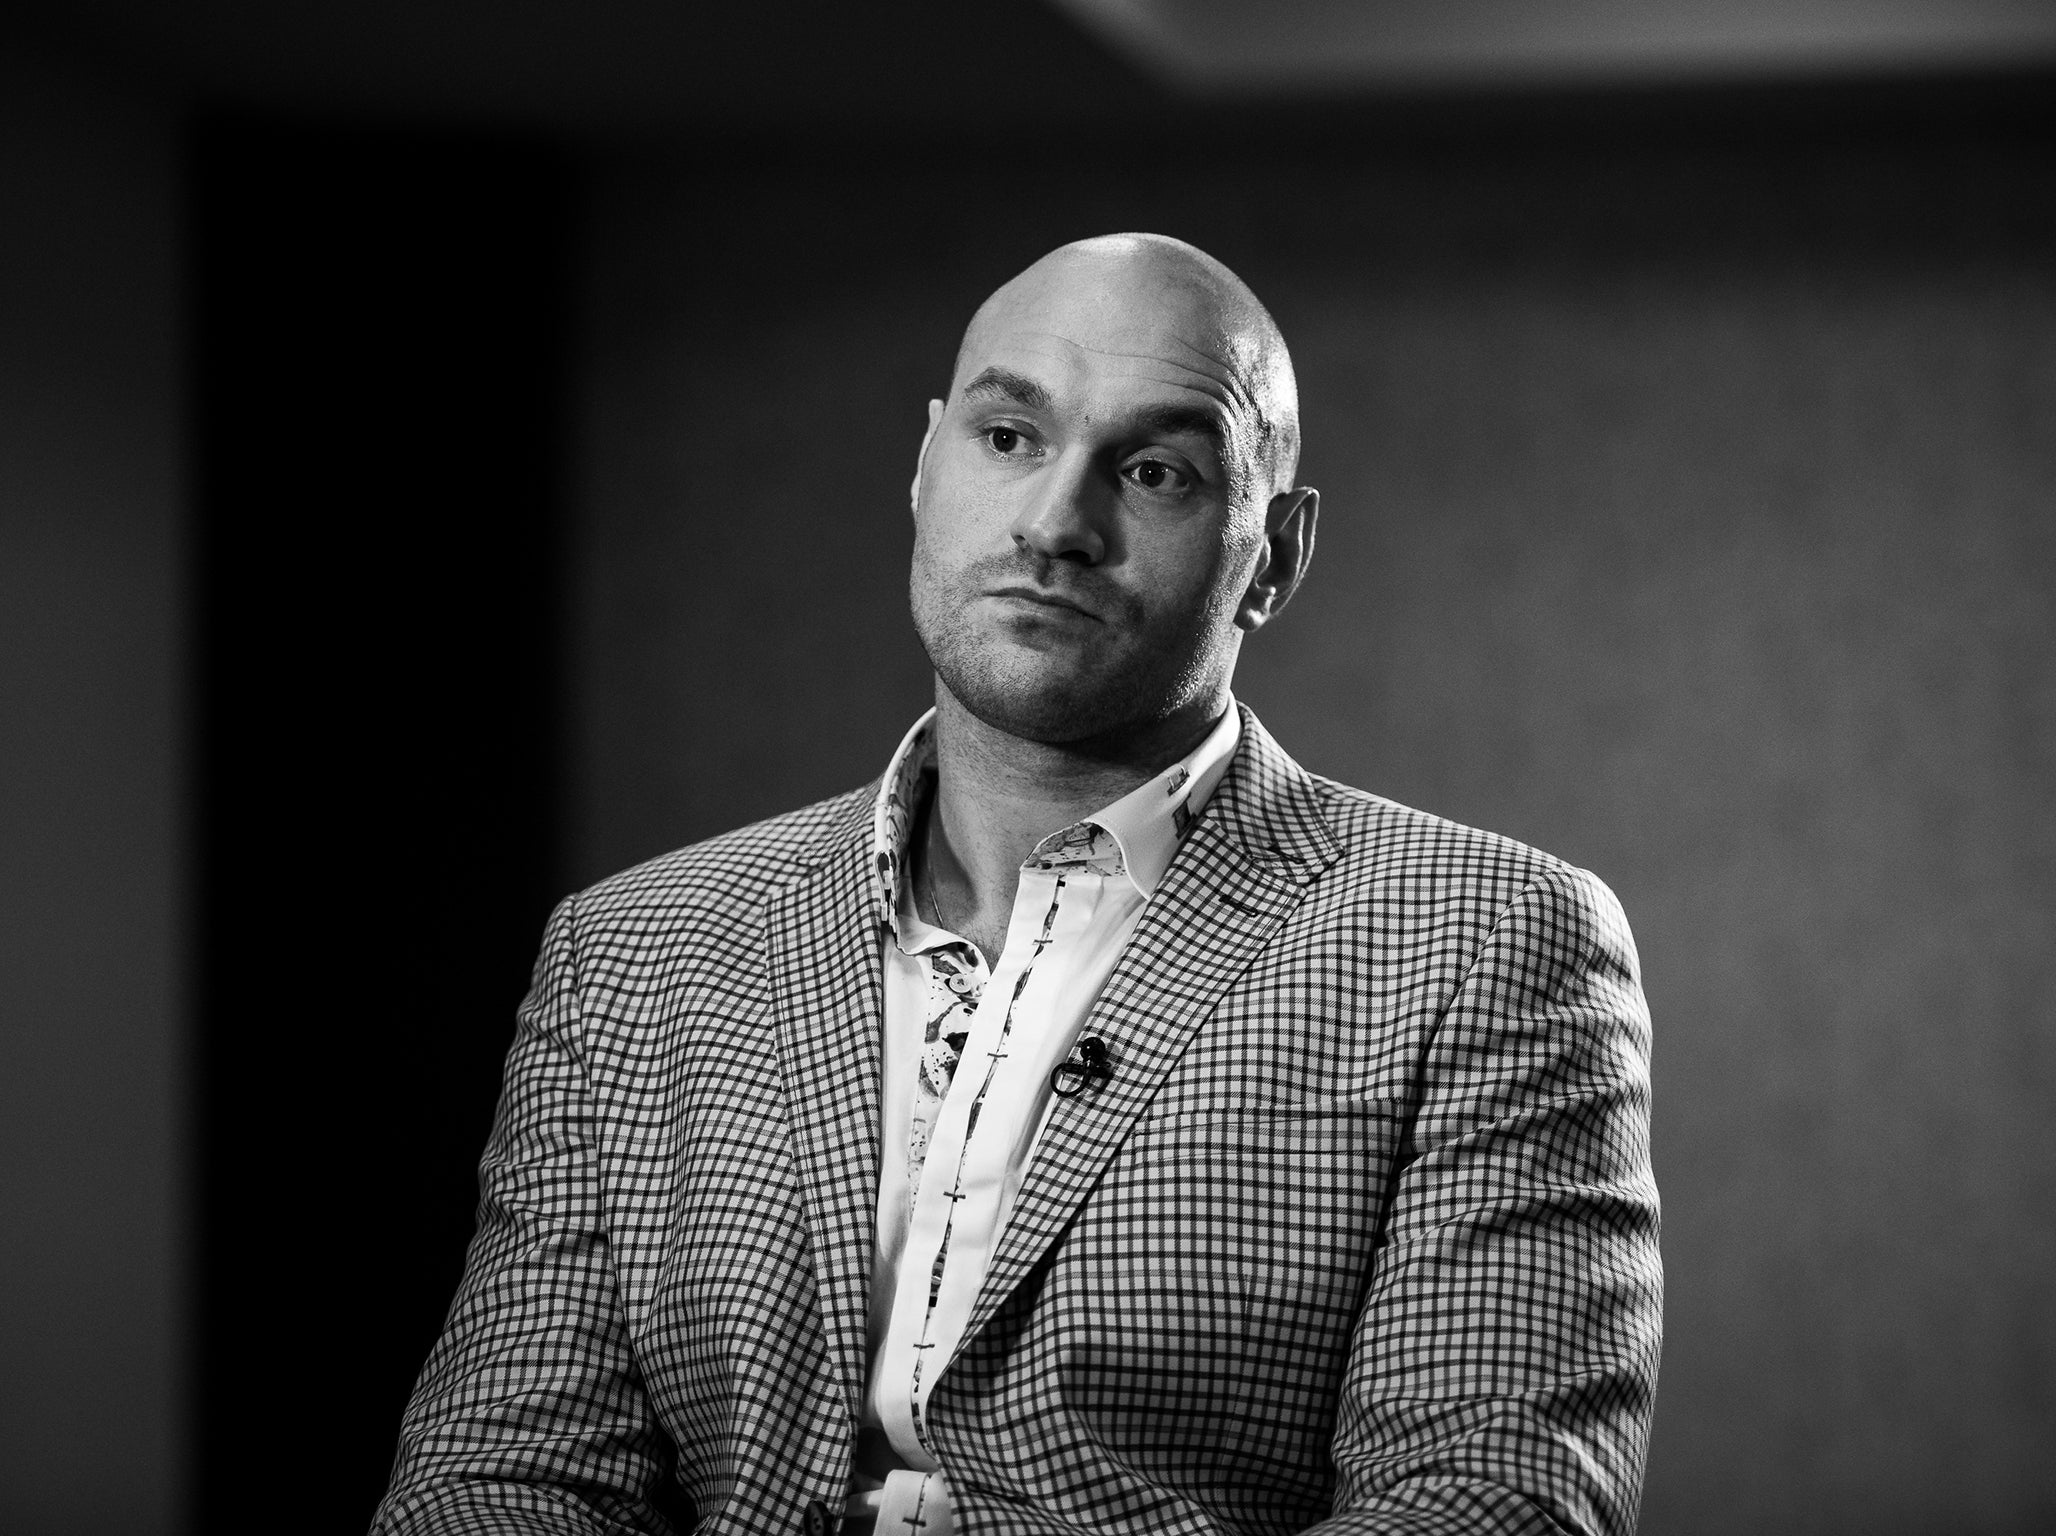 Tyson Fury fights for the world title on Saturday night